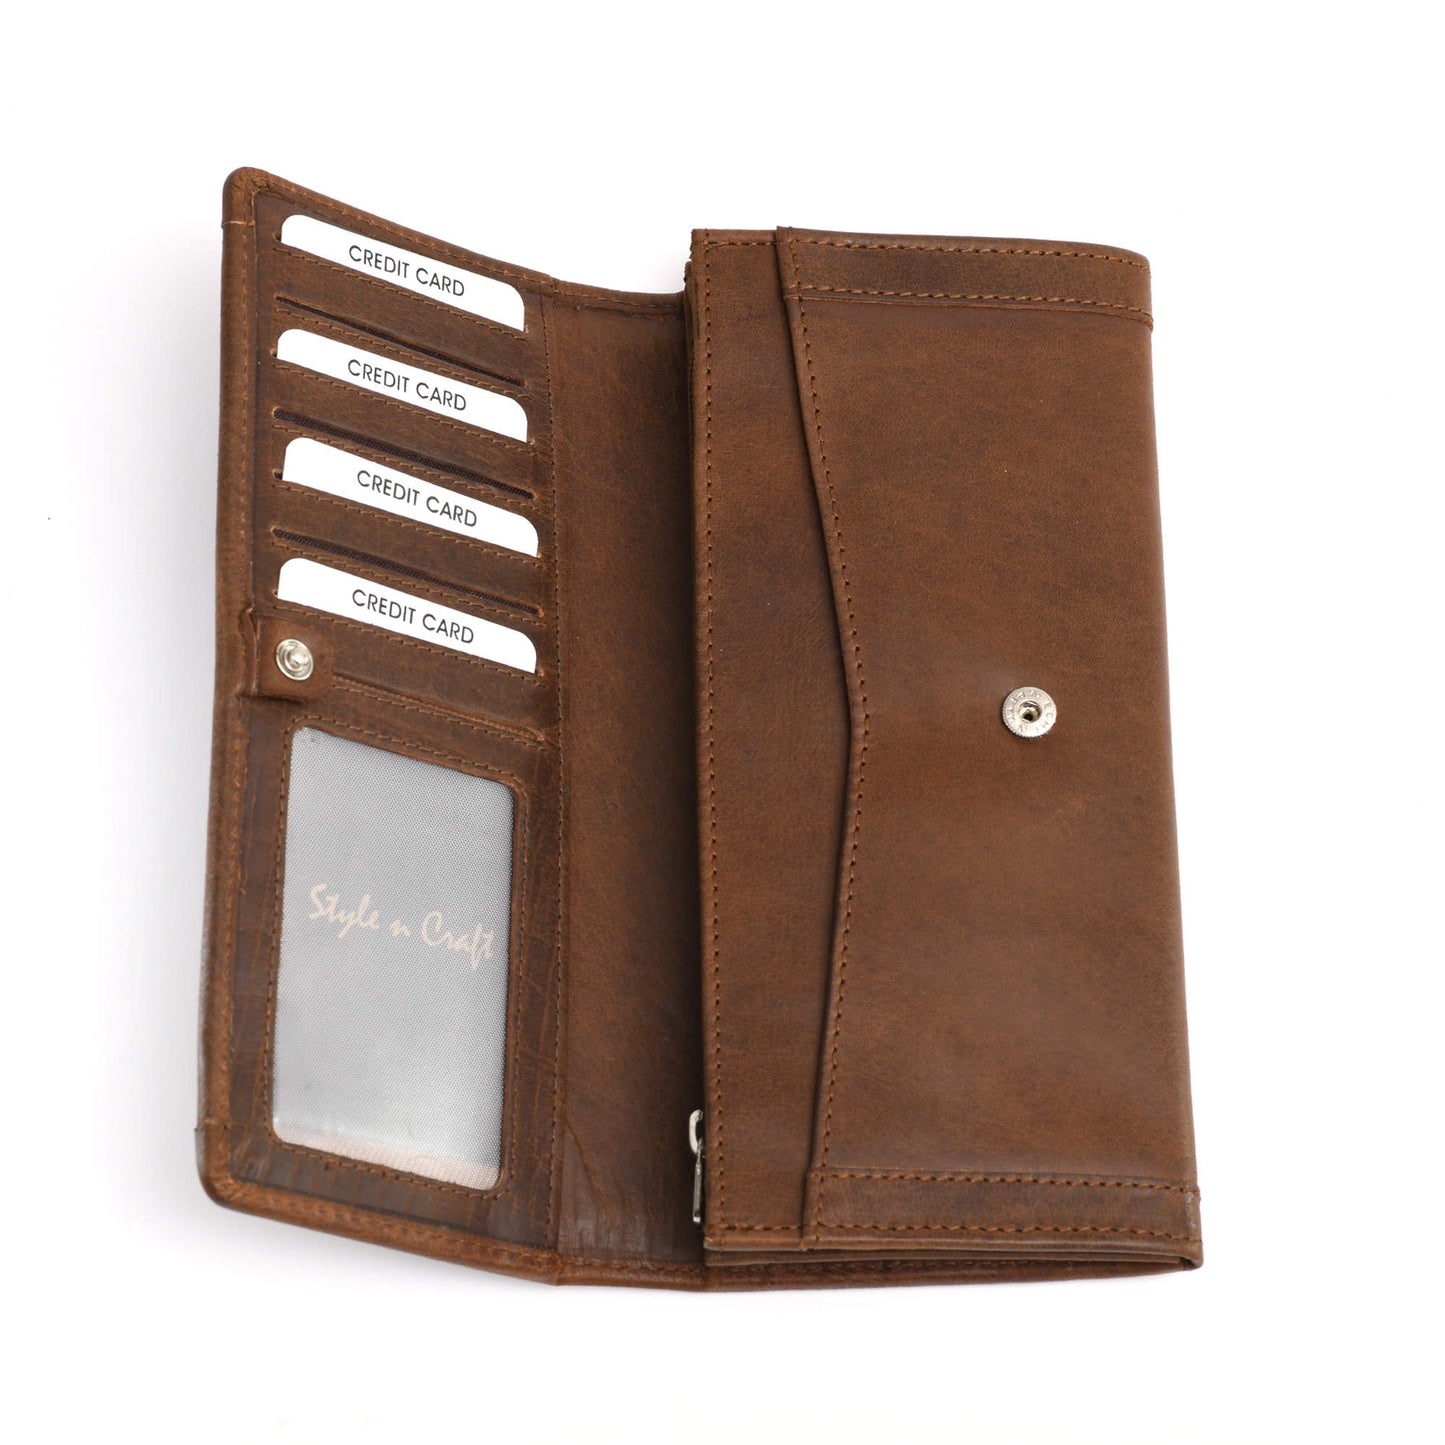 Style n Craft 391106 Ladies Long Clutch Wallet in Oak Color Leather with a Leather Frame on the Outside - Open View 1